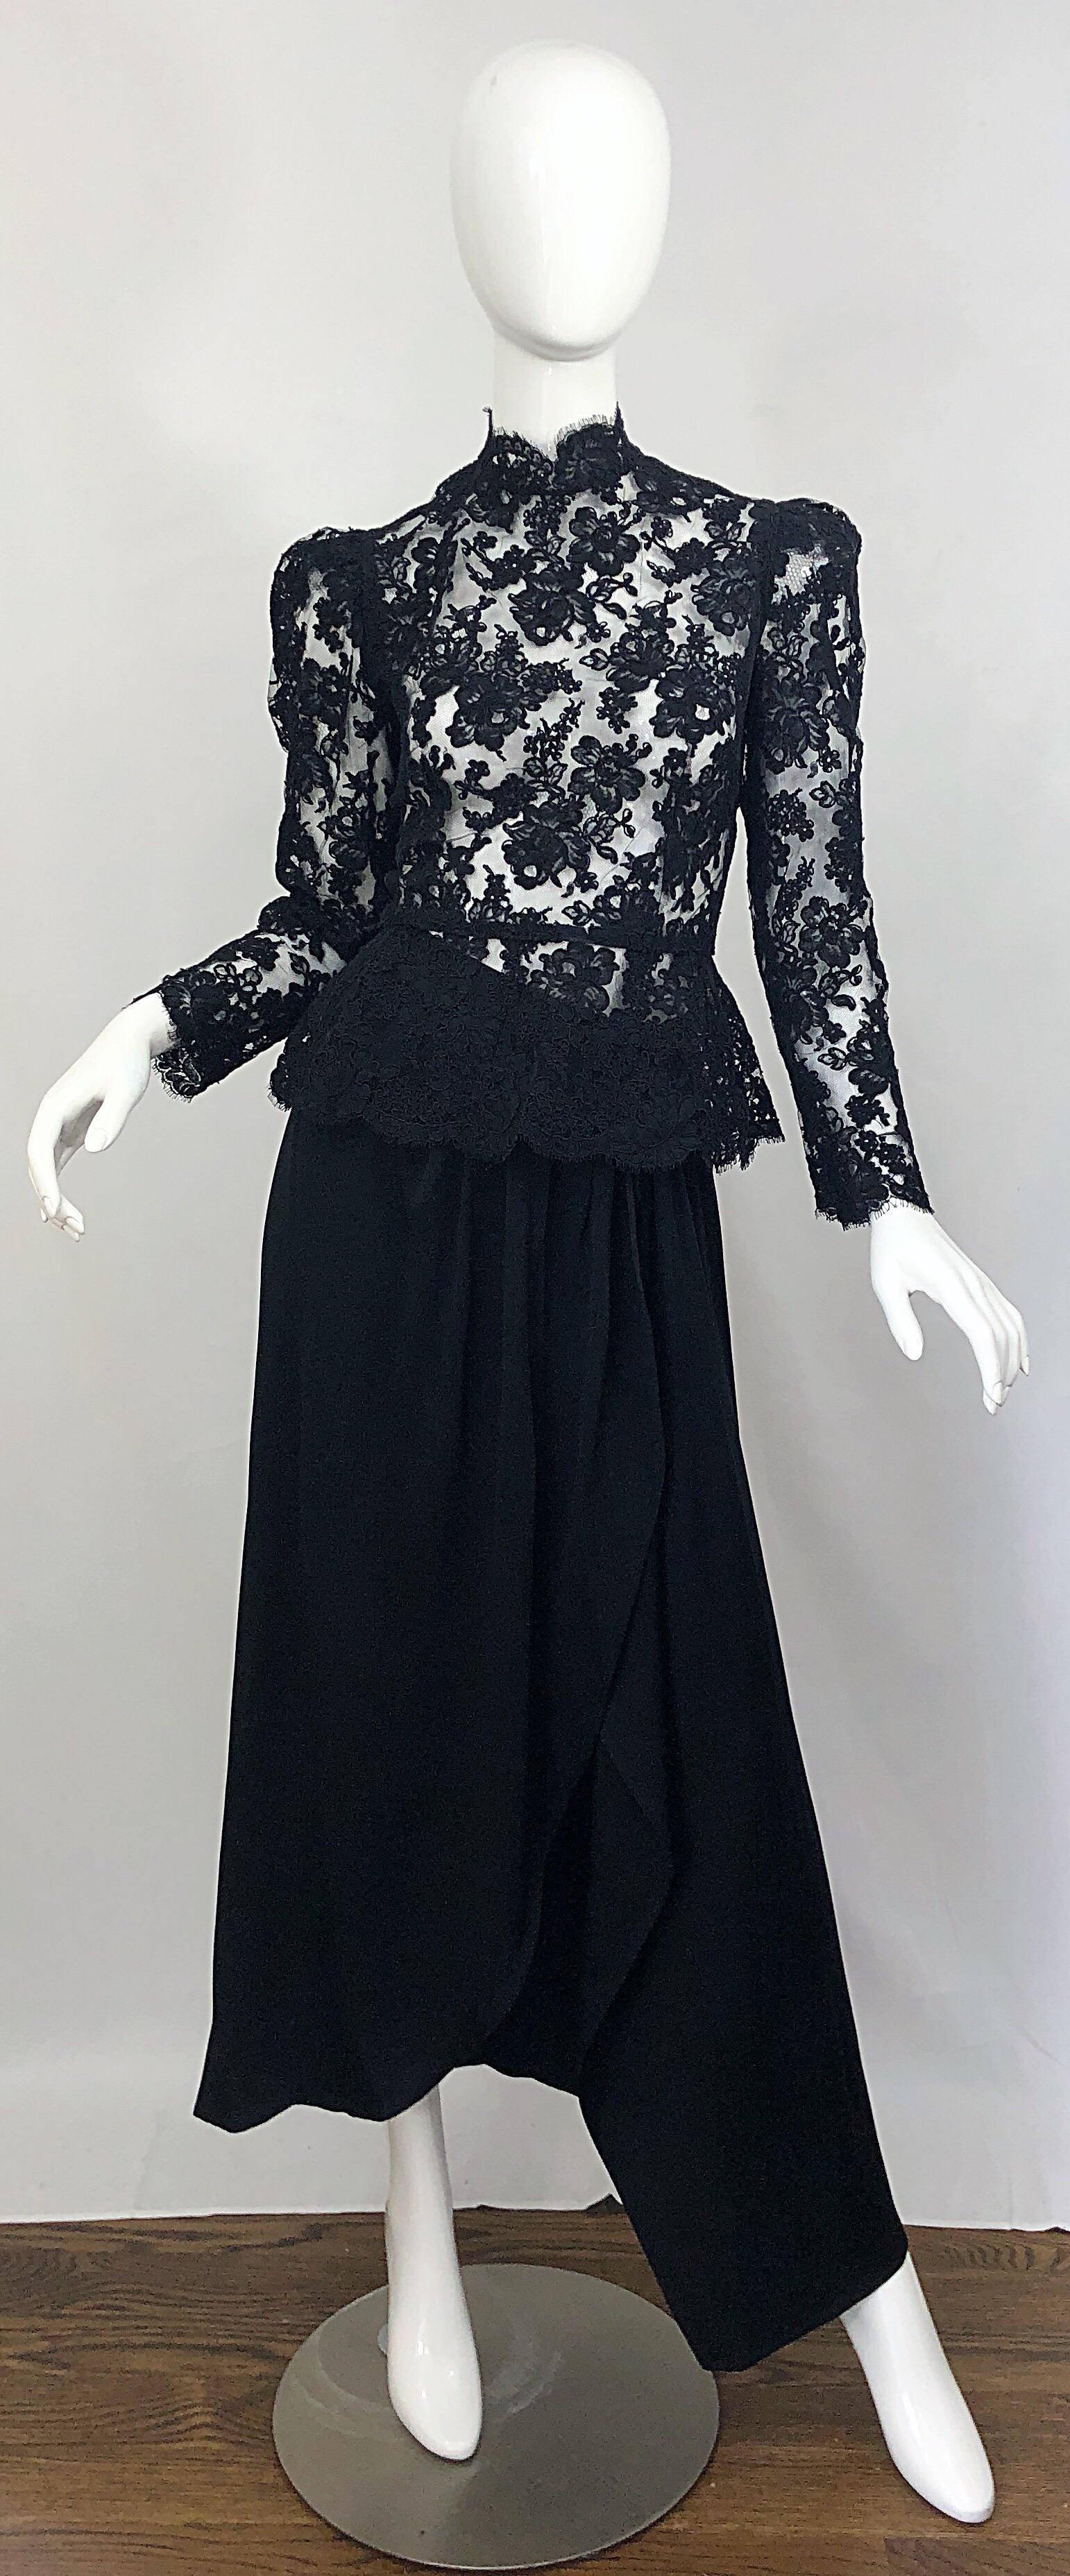 Vintage Vicky Tiel Couture 1980s Black Lace Victorian Top + Asymmetrical Skirt For Sale 9